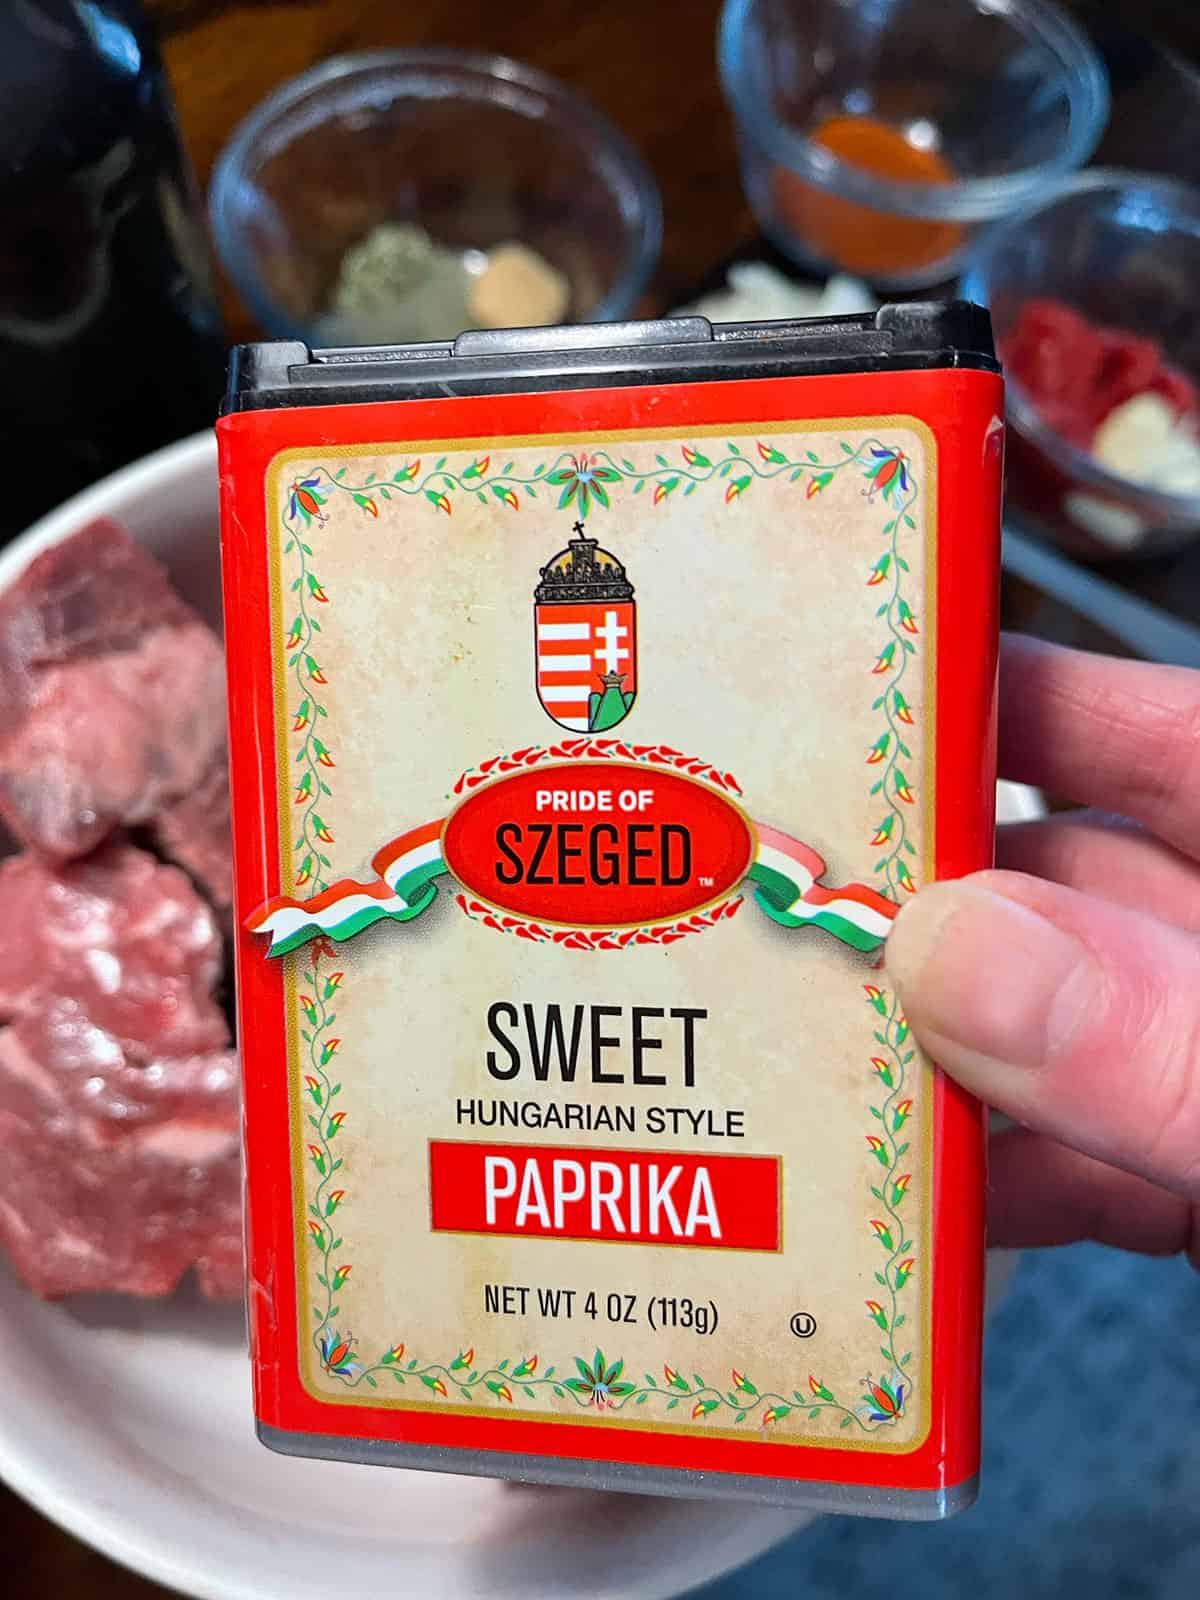 Photo of a can of Hungarian sweet paprika